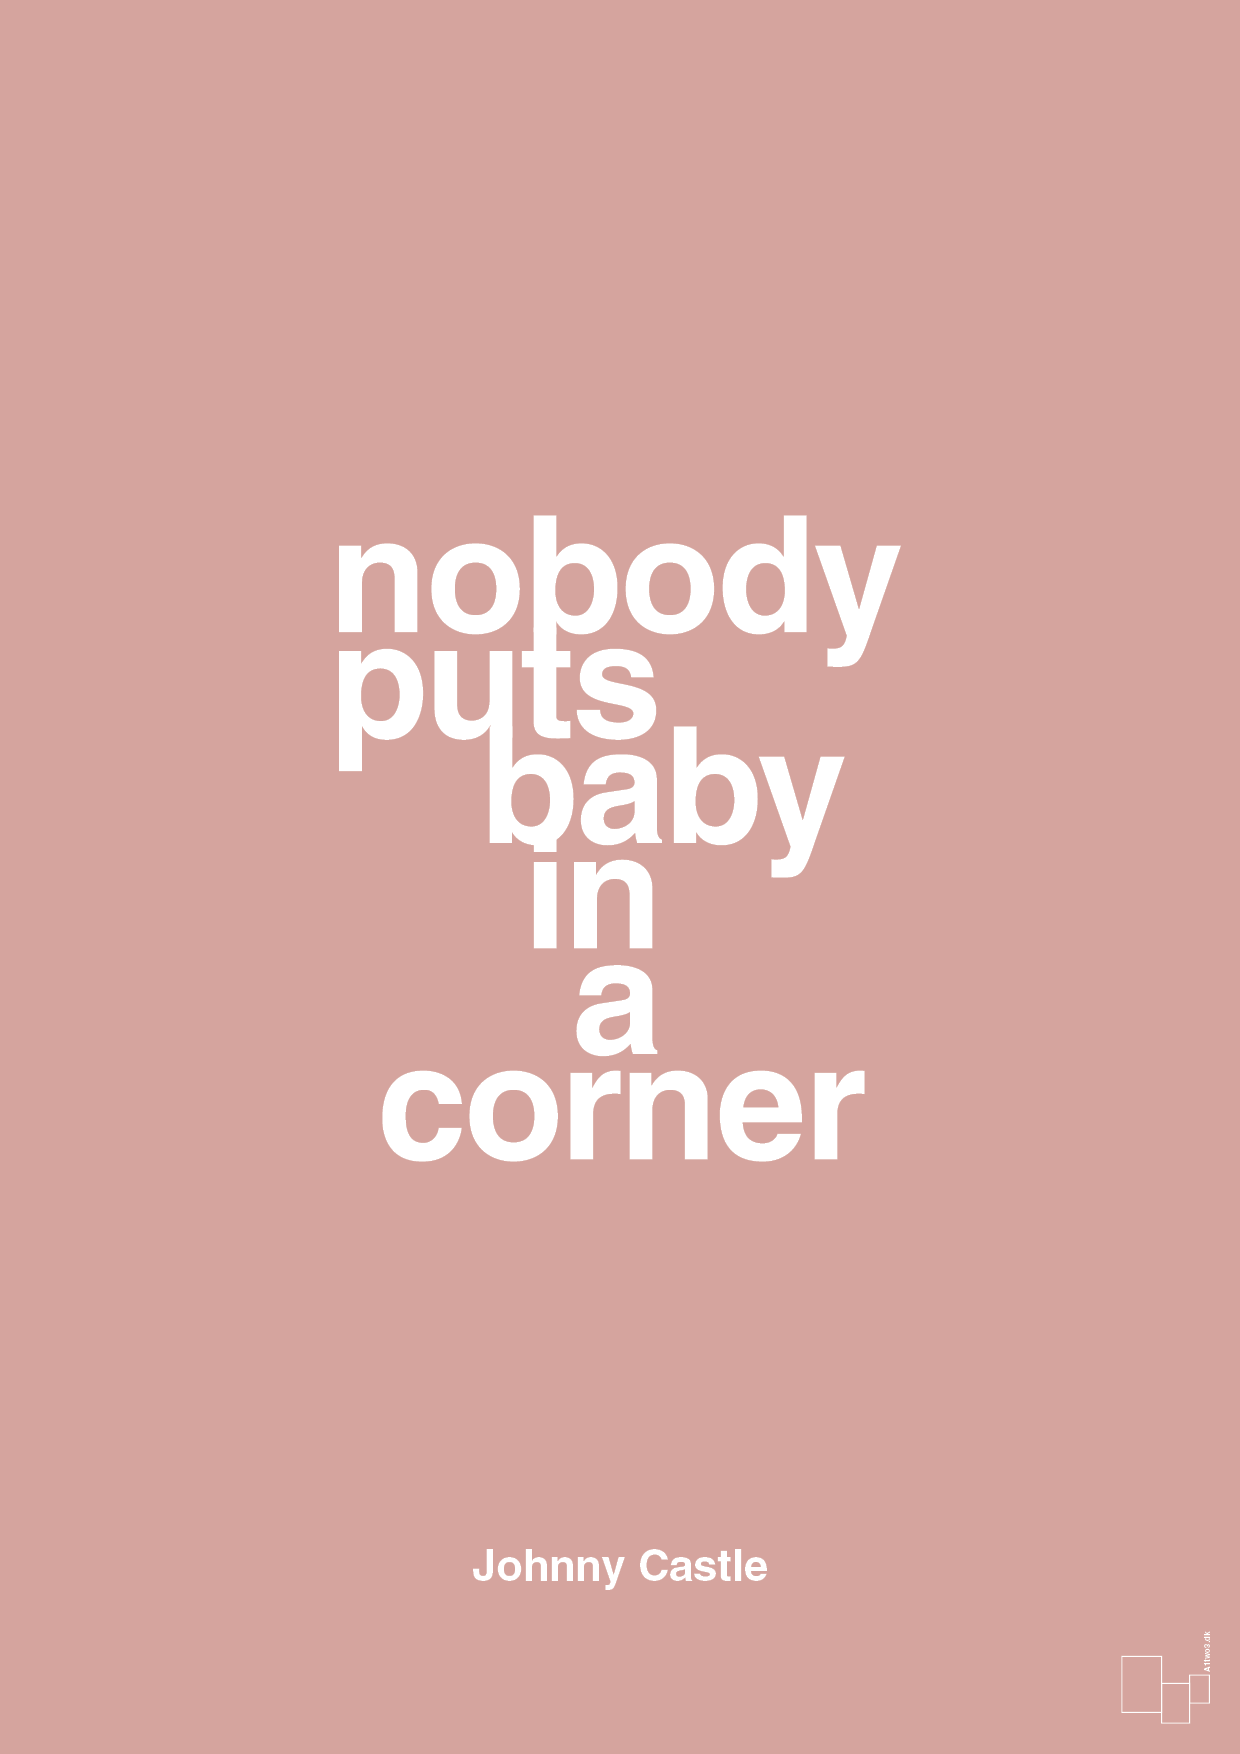 nobody puts baby in a corner - Plakat med Citater i Bubble Shell